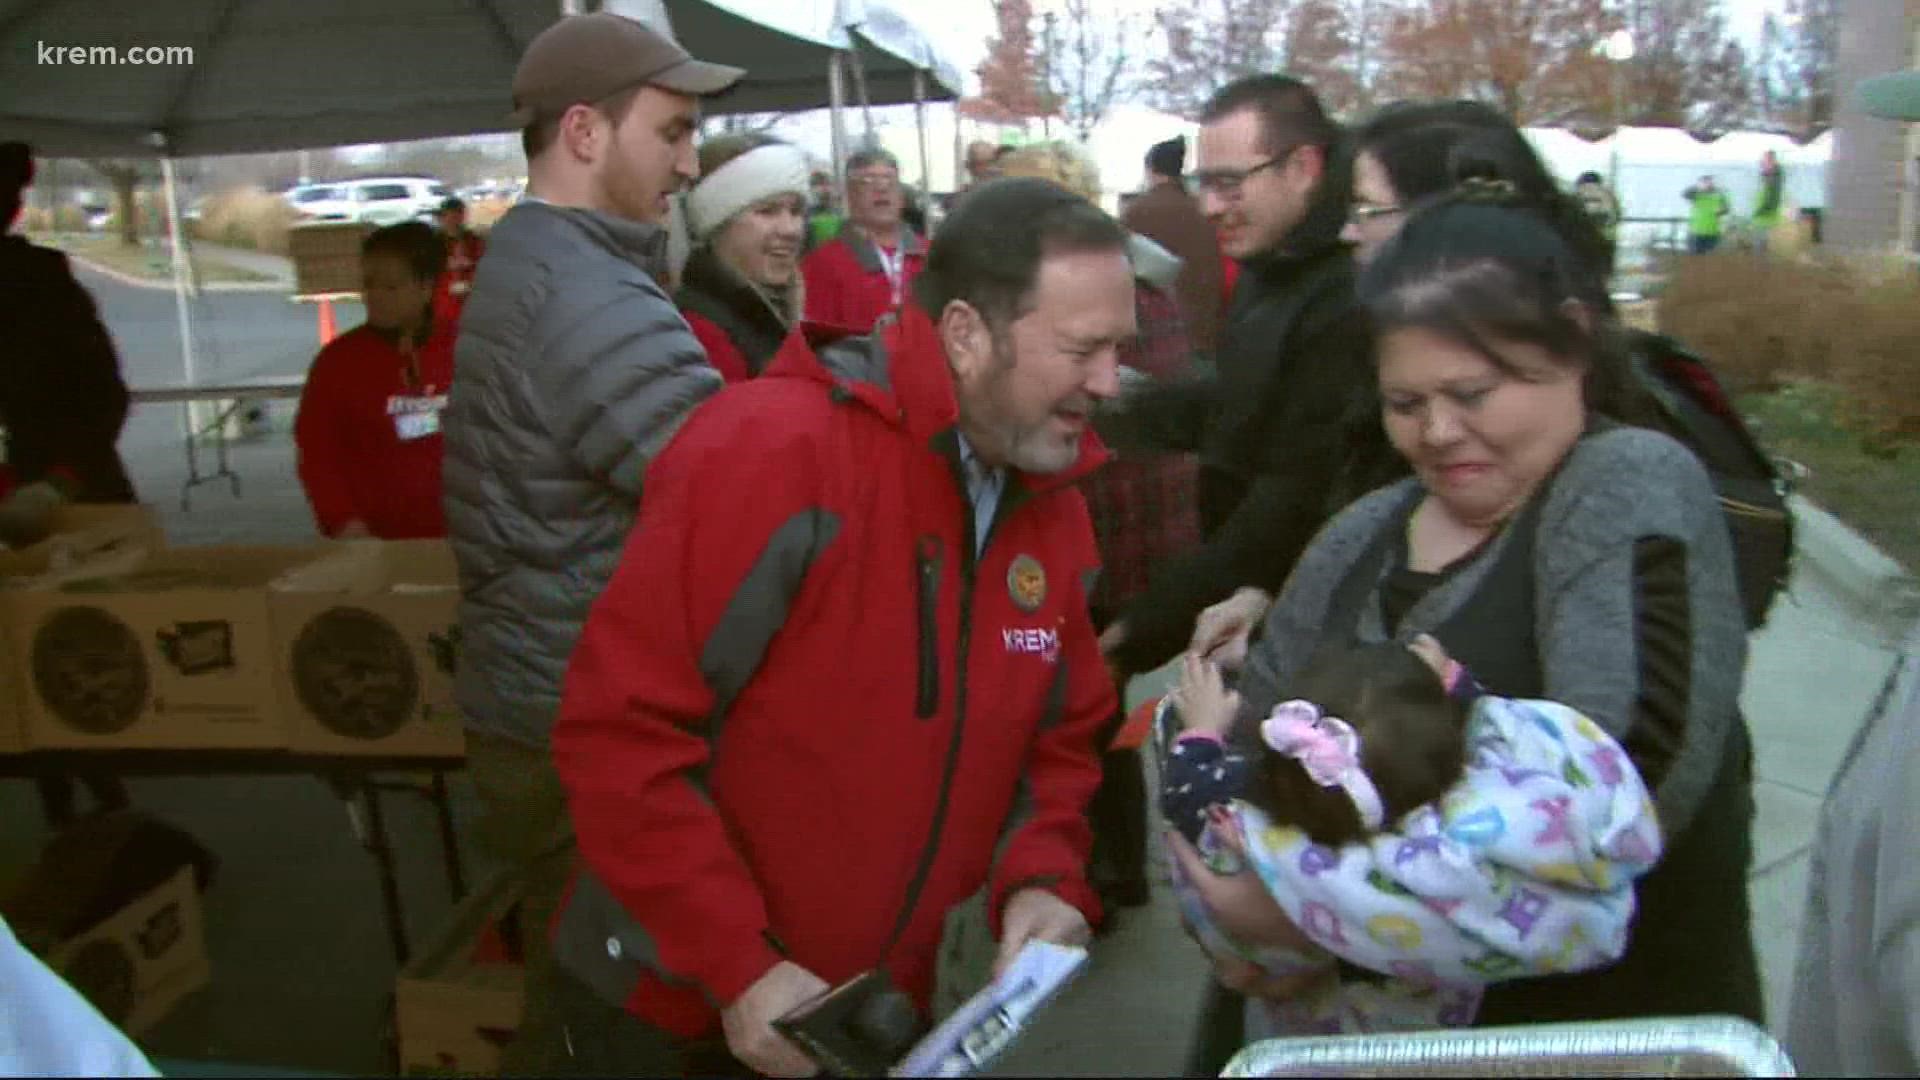 KREM 2's Laura Papetti looks back on Tom Sherry's unwavering dedication to Spokane through Tom's Turkey Drive and goes over plans for the charity going forward.